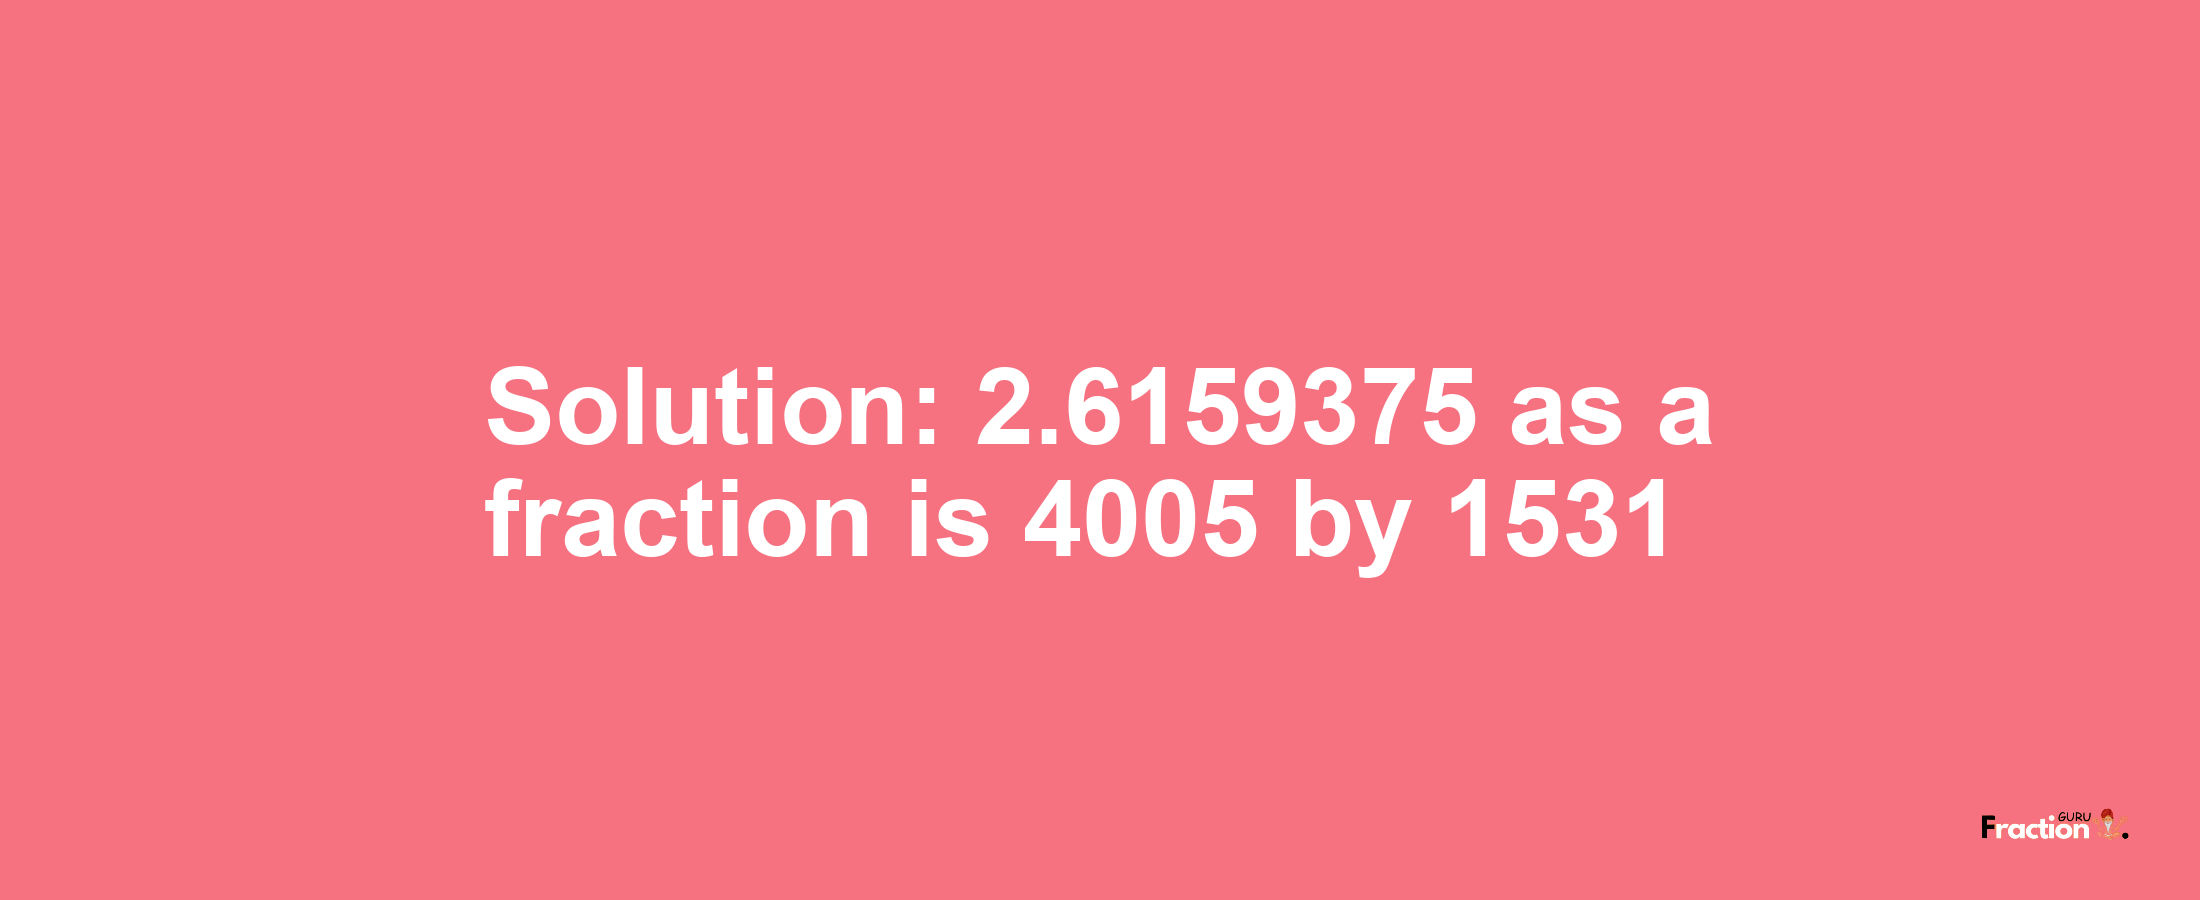 Solution:2.6159375 as a fraction is 4005/1531